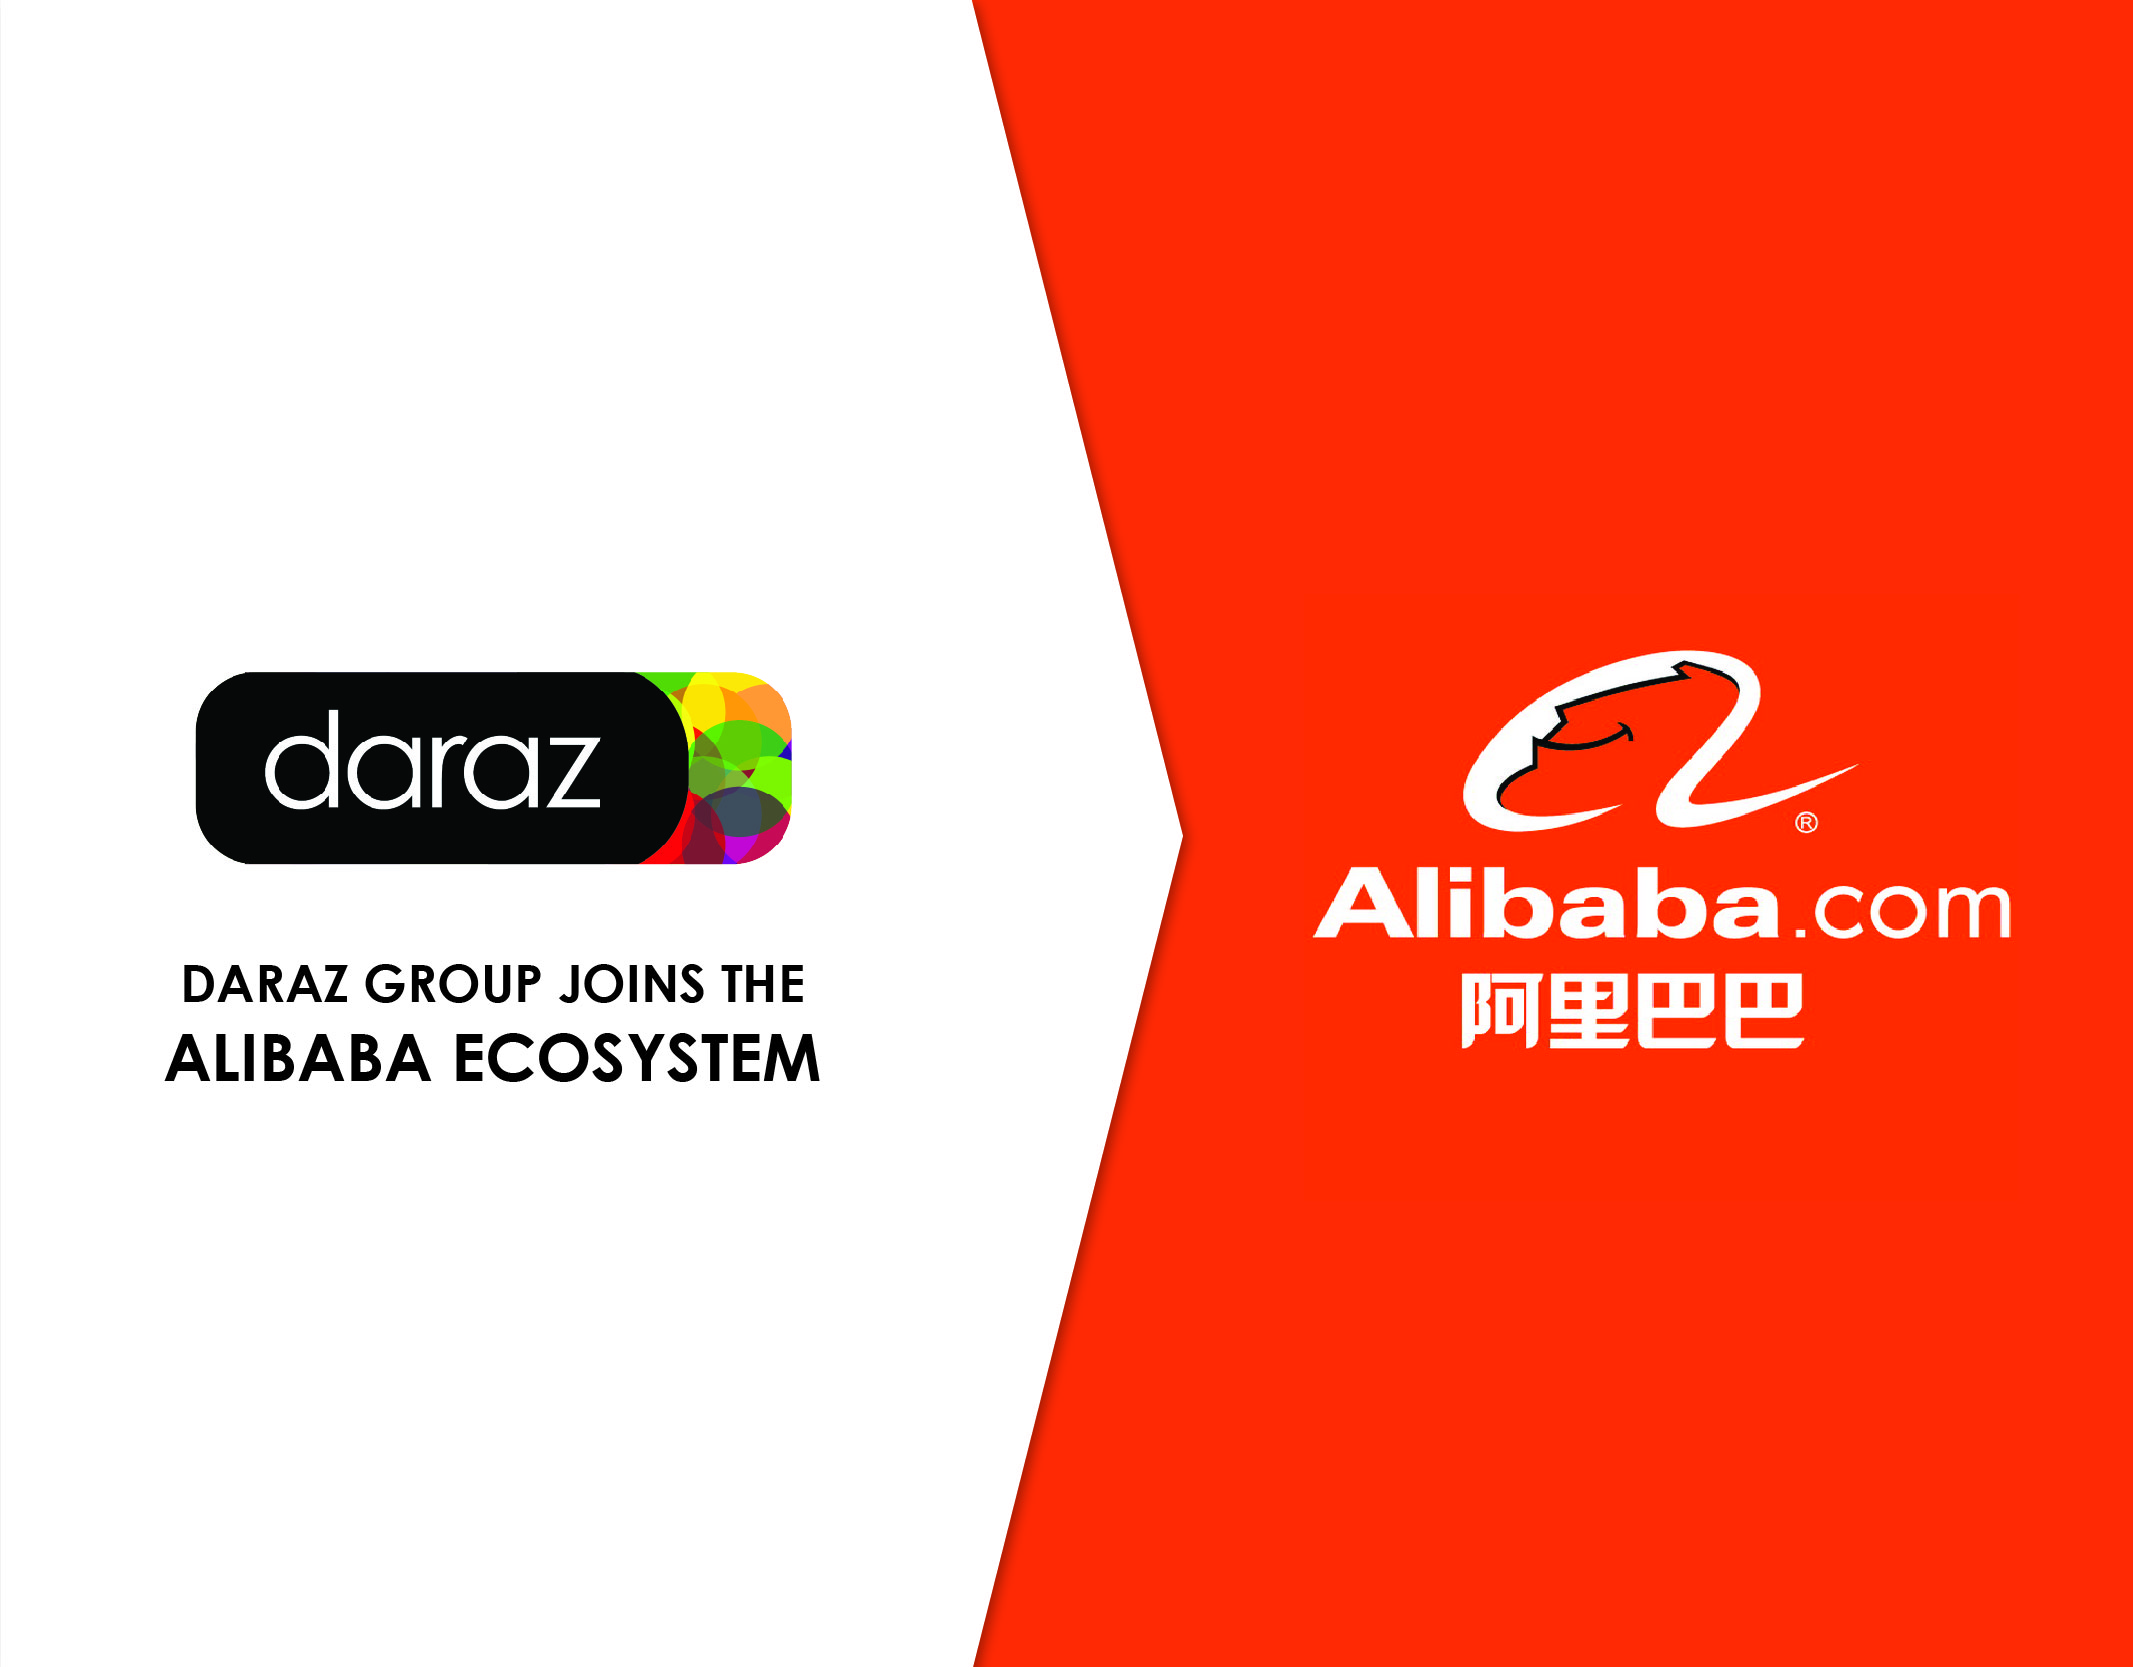  Daraz Group Joins the Alibaba Ecosystem